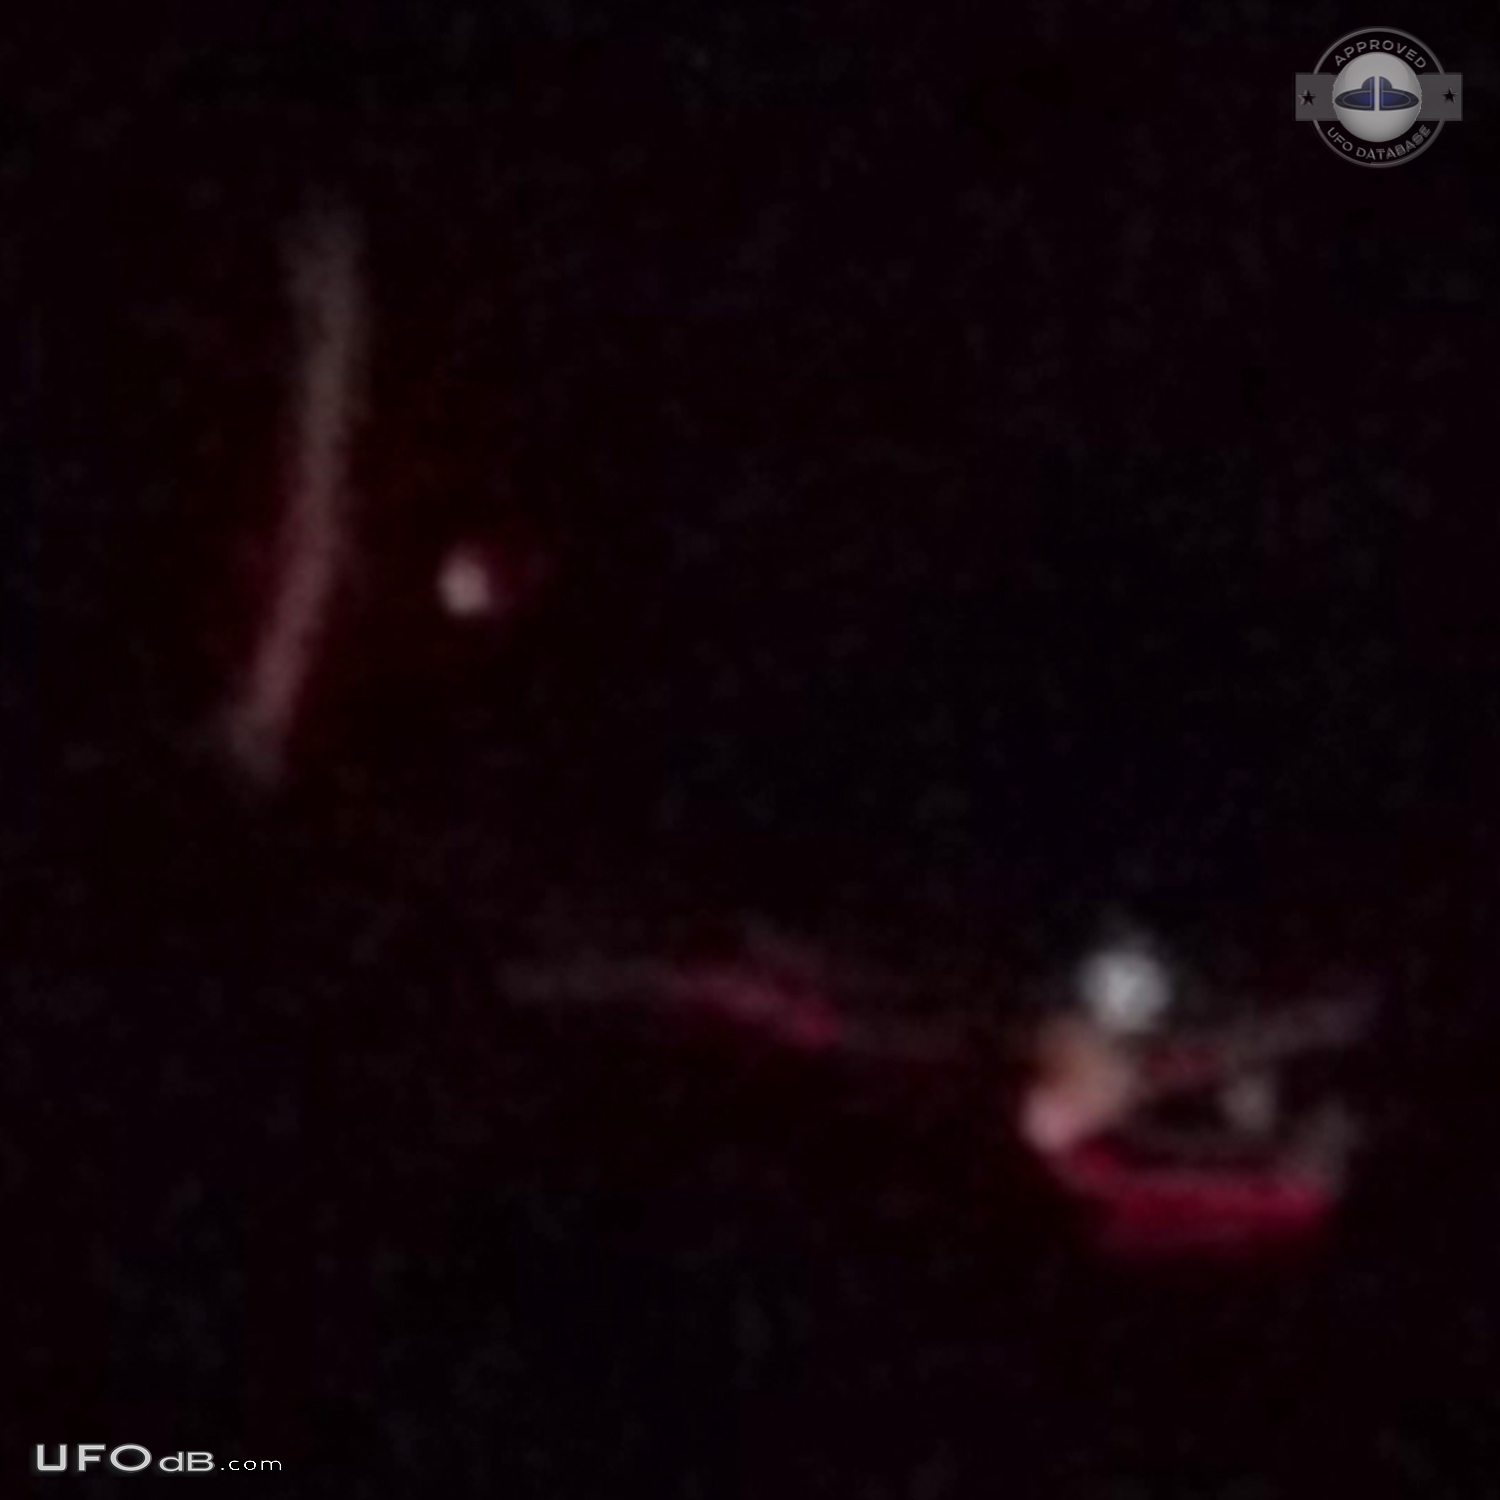 Thought at first it was a star. But too big and bright - Gainesville M UFO Picture #753-3